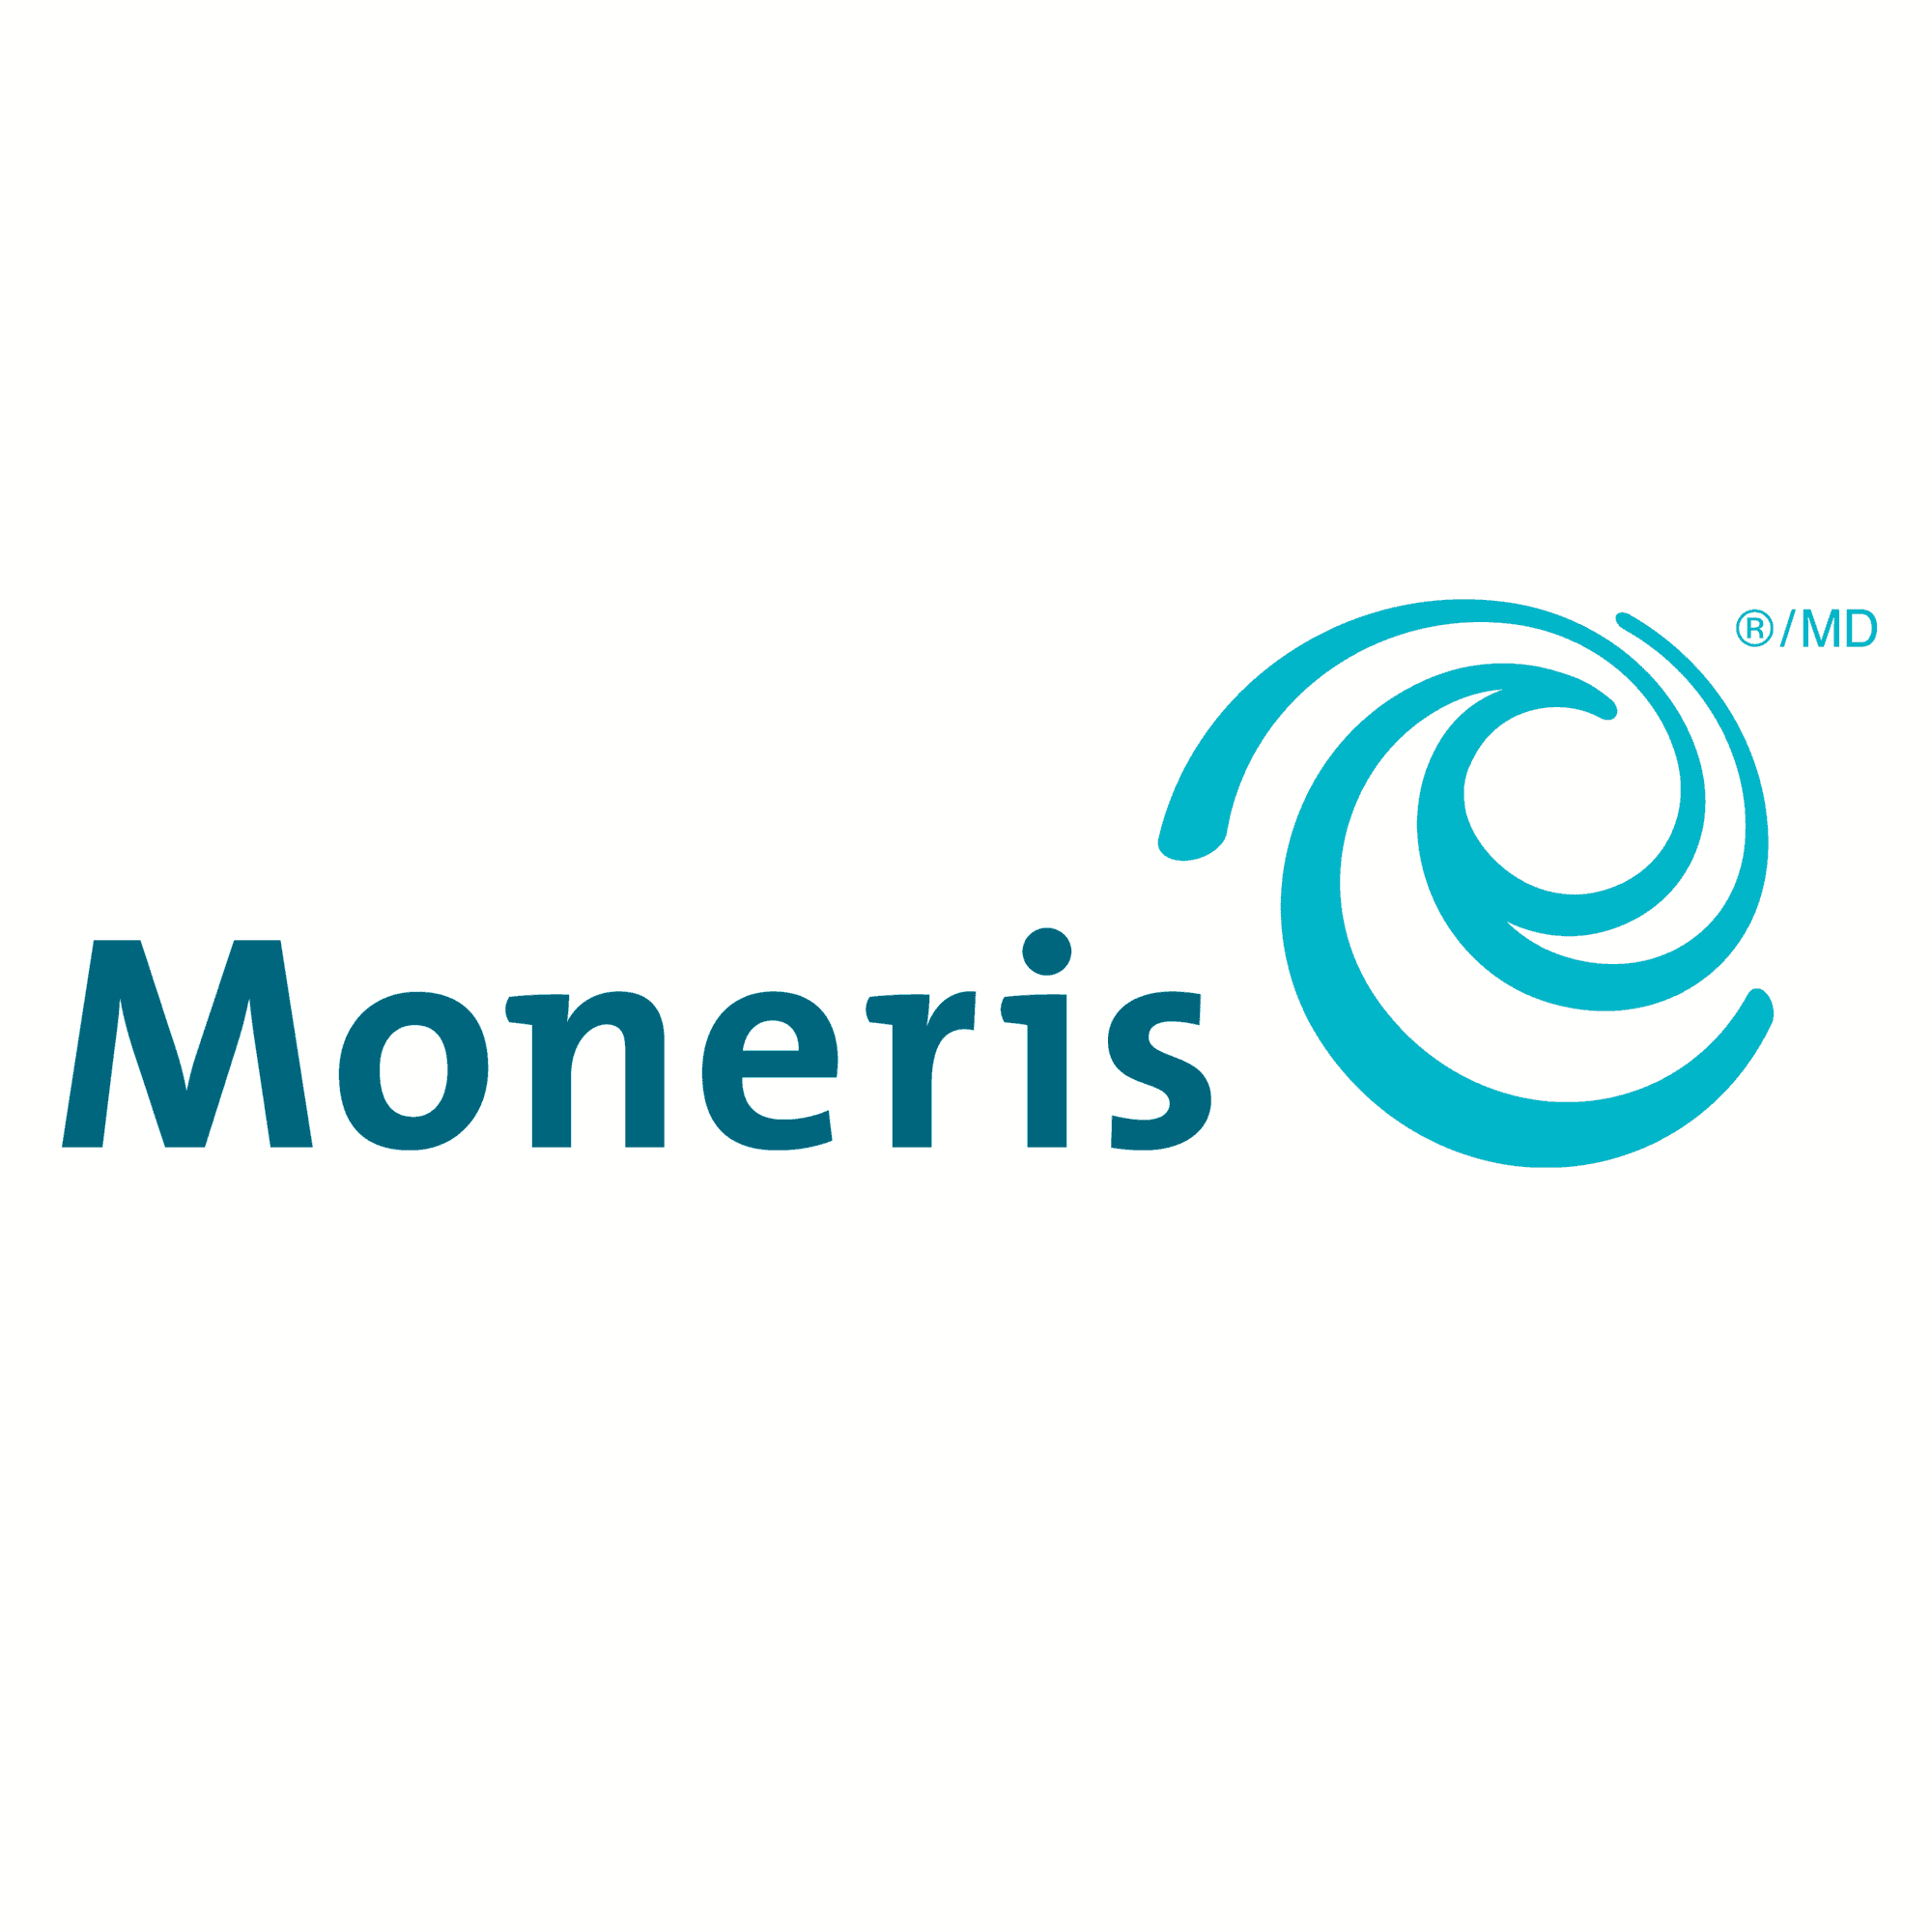 <p><span class="ql-size-small ql-font-montserrat" style="color: rgb(0, 0, 0);">Moneris is a financial technology and payment processing company in Canada that's been a valued partner of Second Harvest since 2017. </span></p><p><br></p><p><span class="ql-size-small ql-font-montserrat" style="color: rgb(0, 0, 0);">﻿From facilitating donations at events, to providing equipment and sponsoring Canada-wide fundraising events, we are proud to have Moneris by our side!</span></p> logo